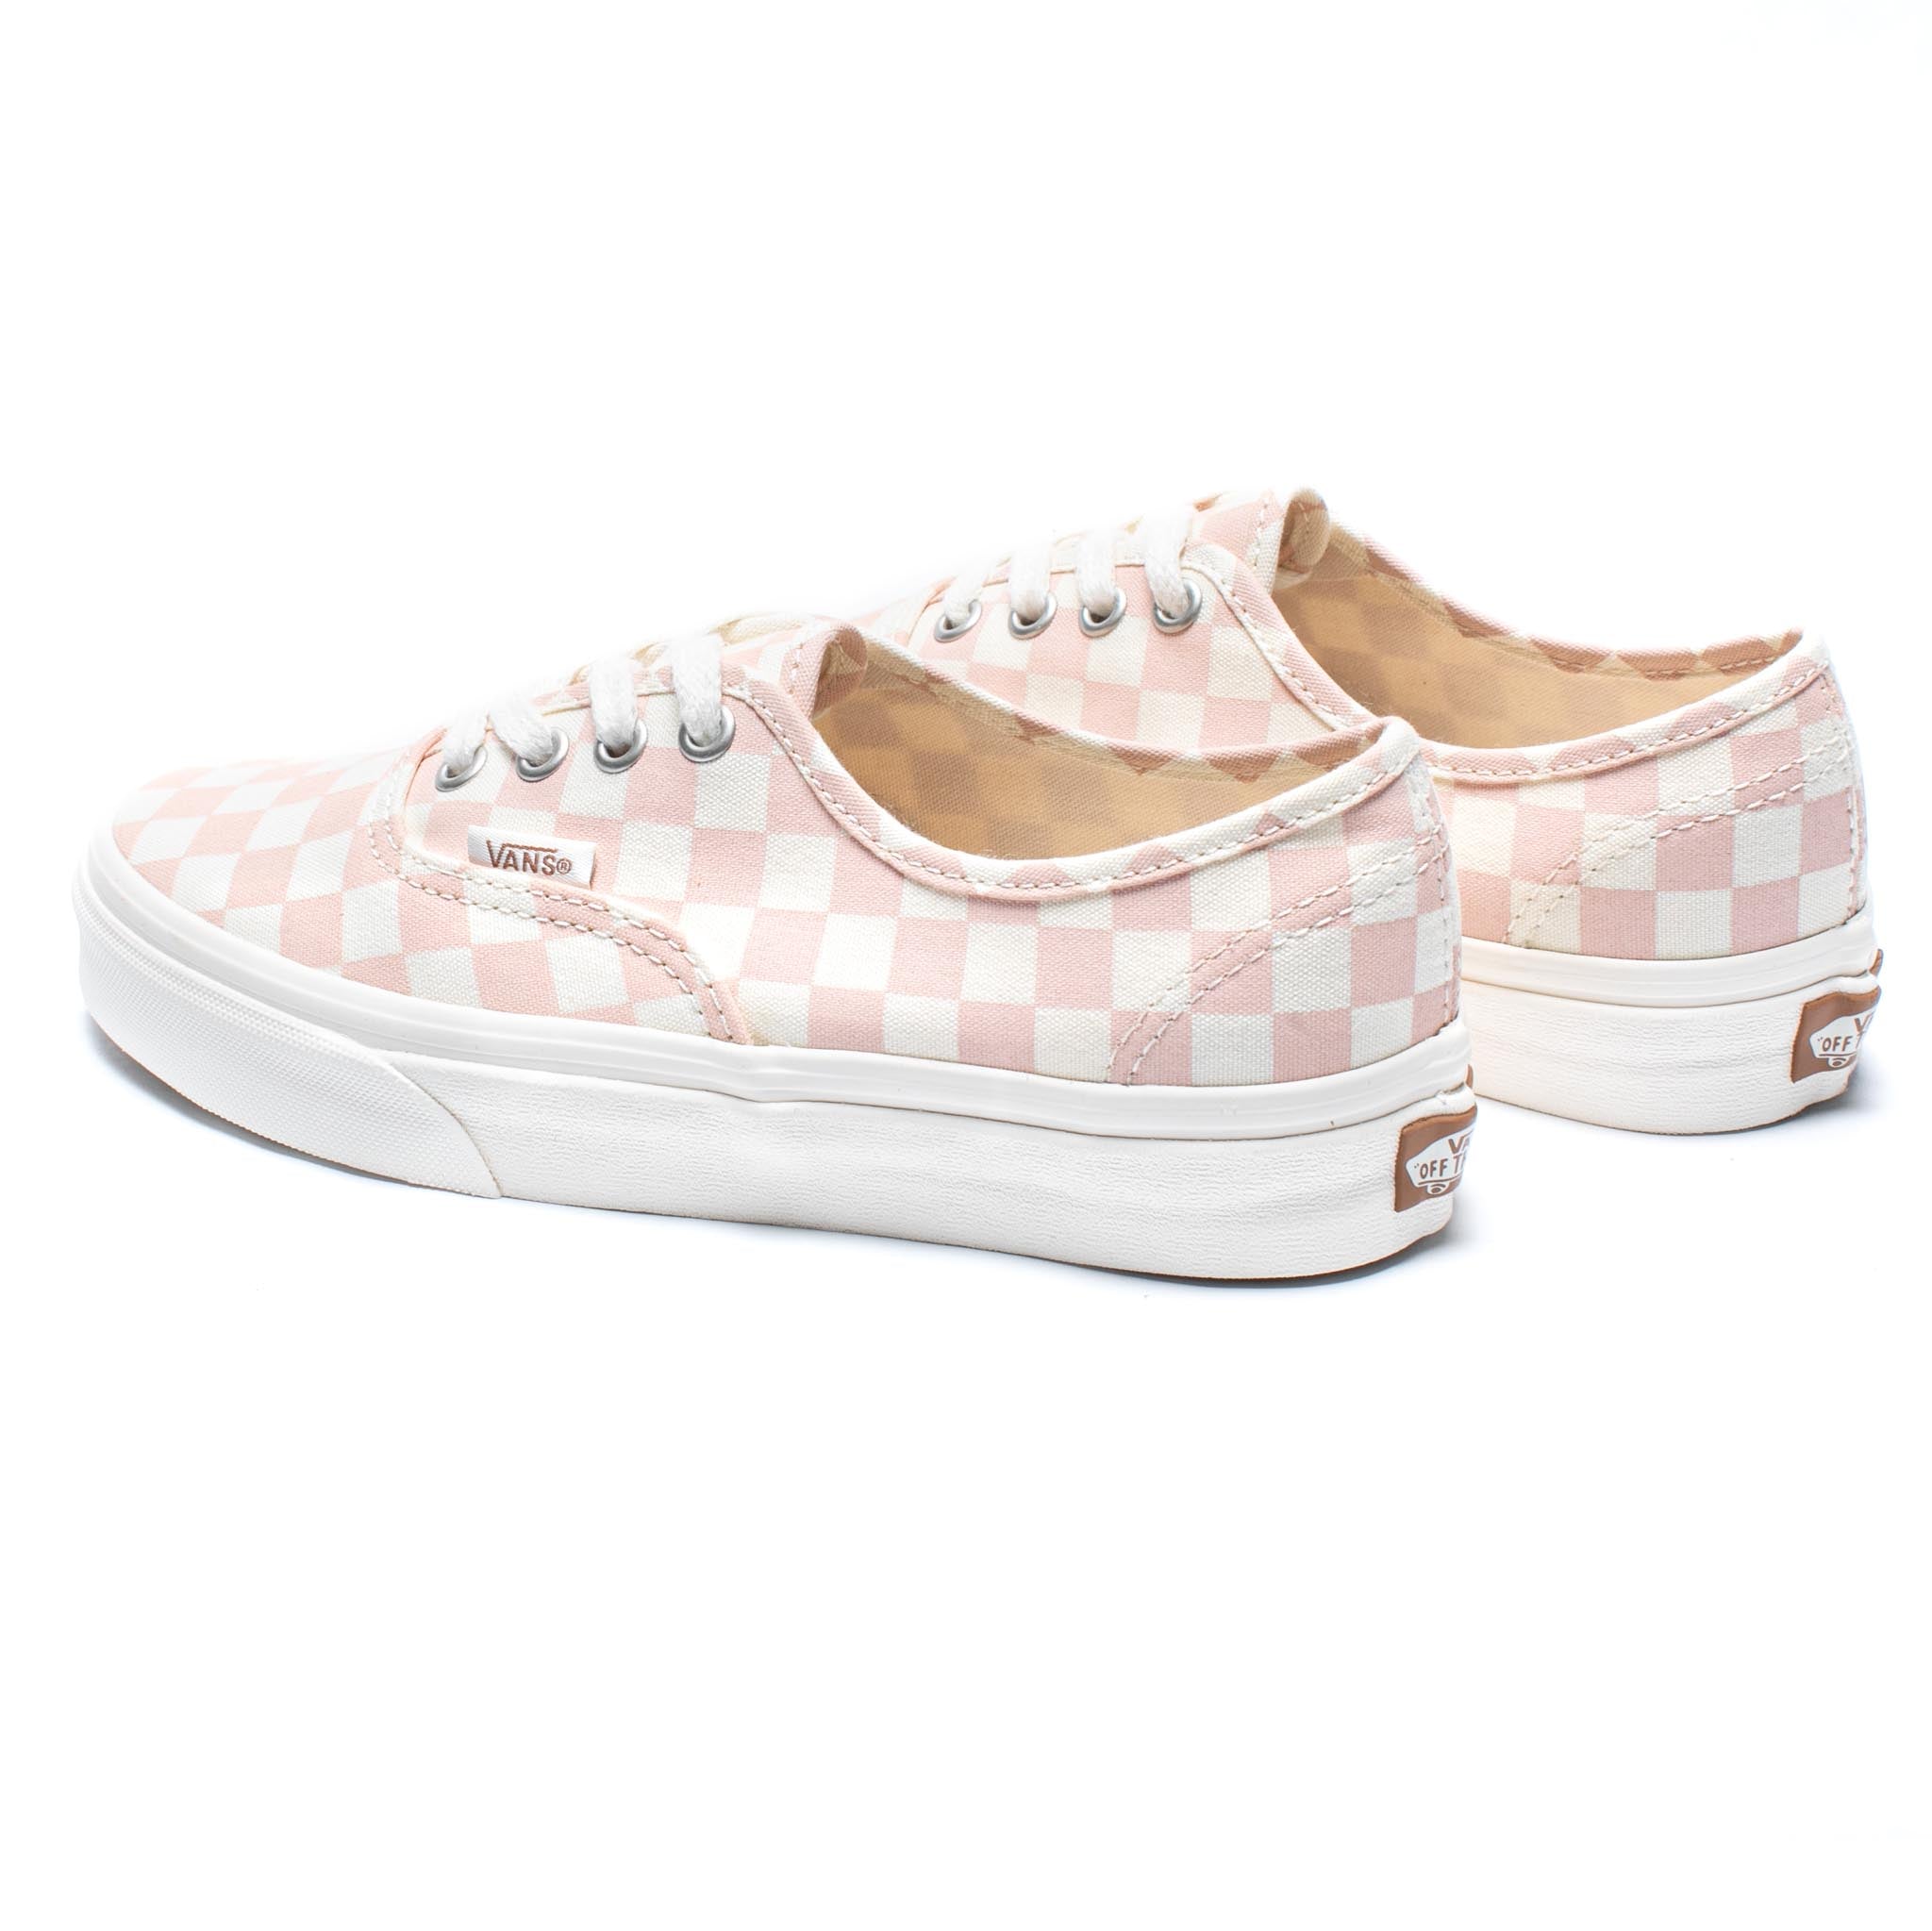 Vans Authentic Pink/White Check